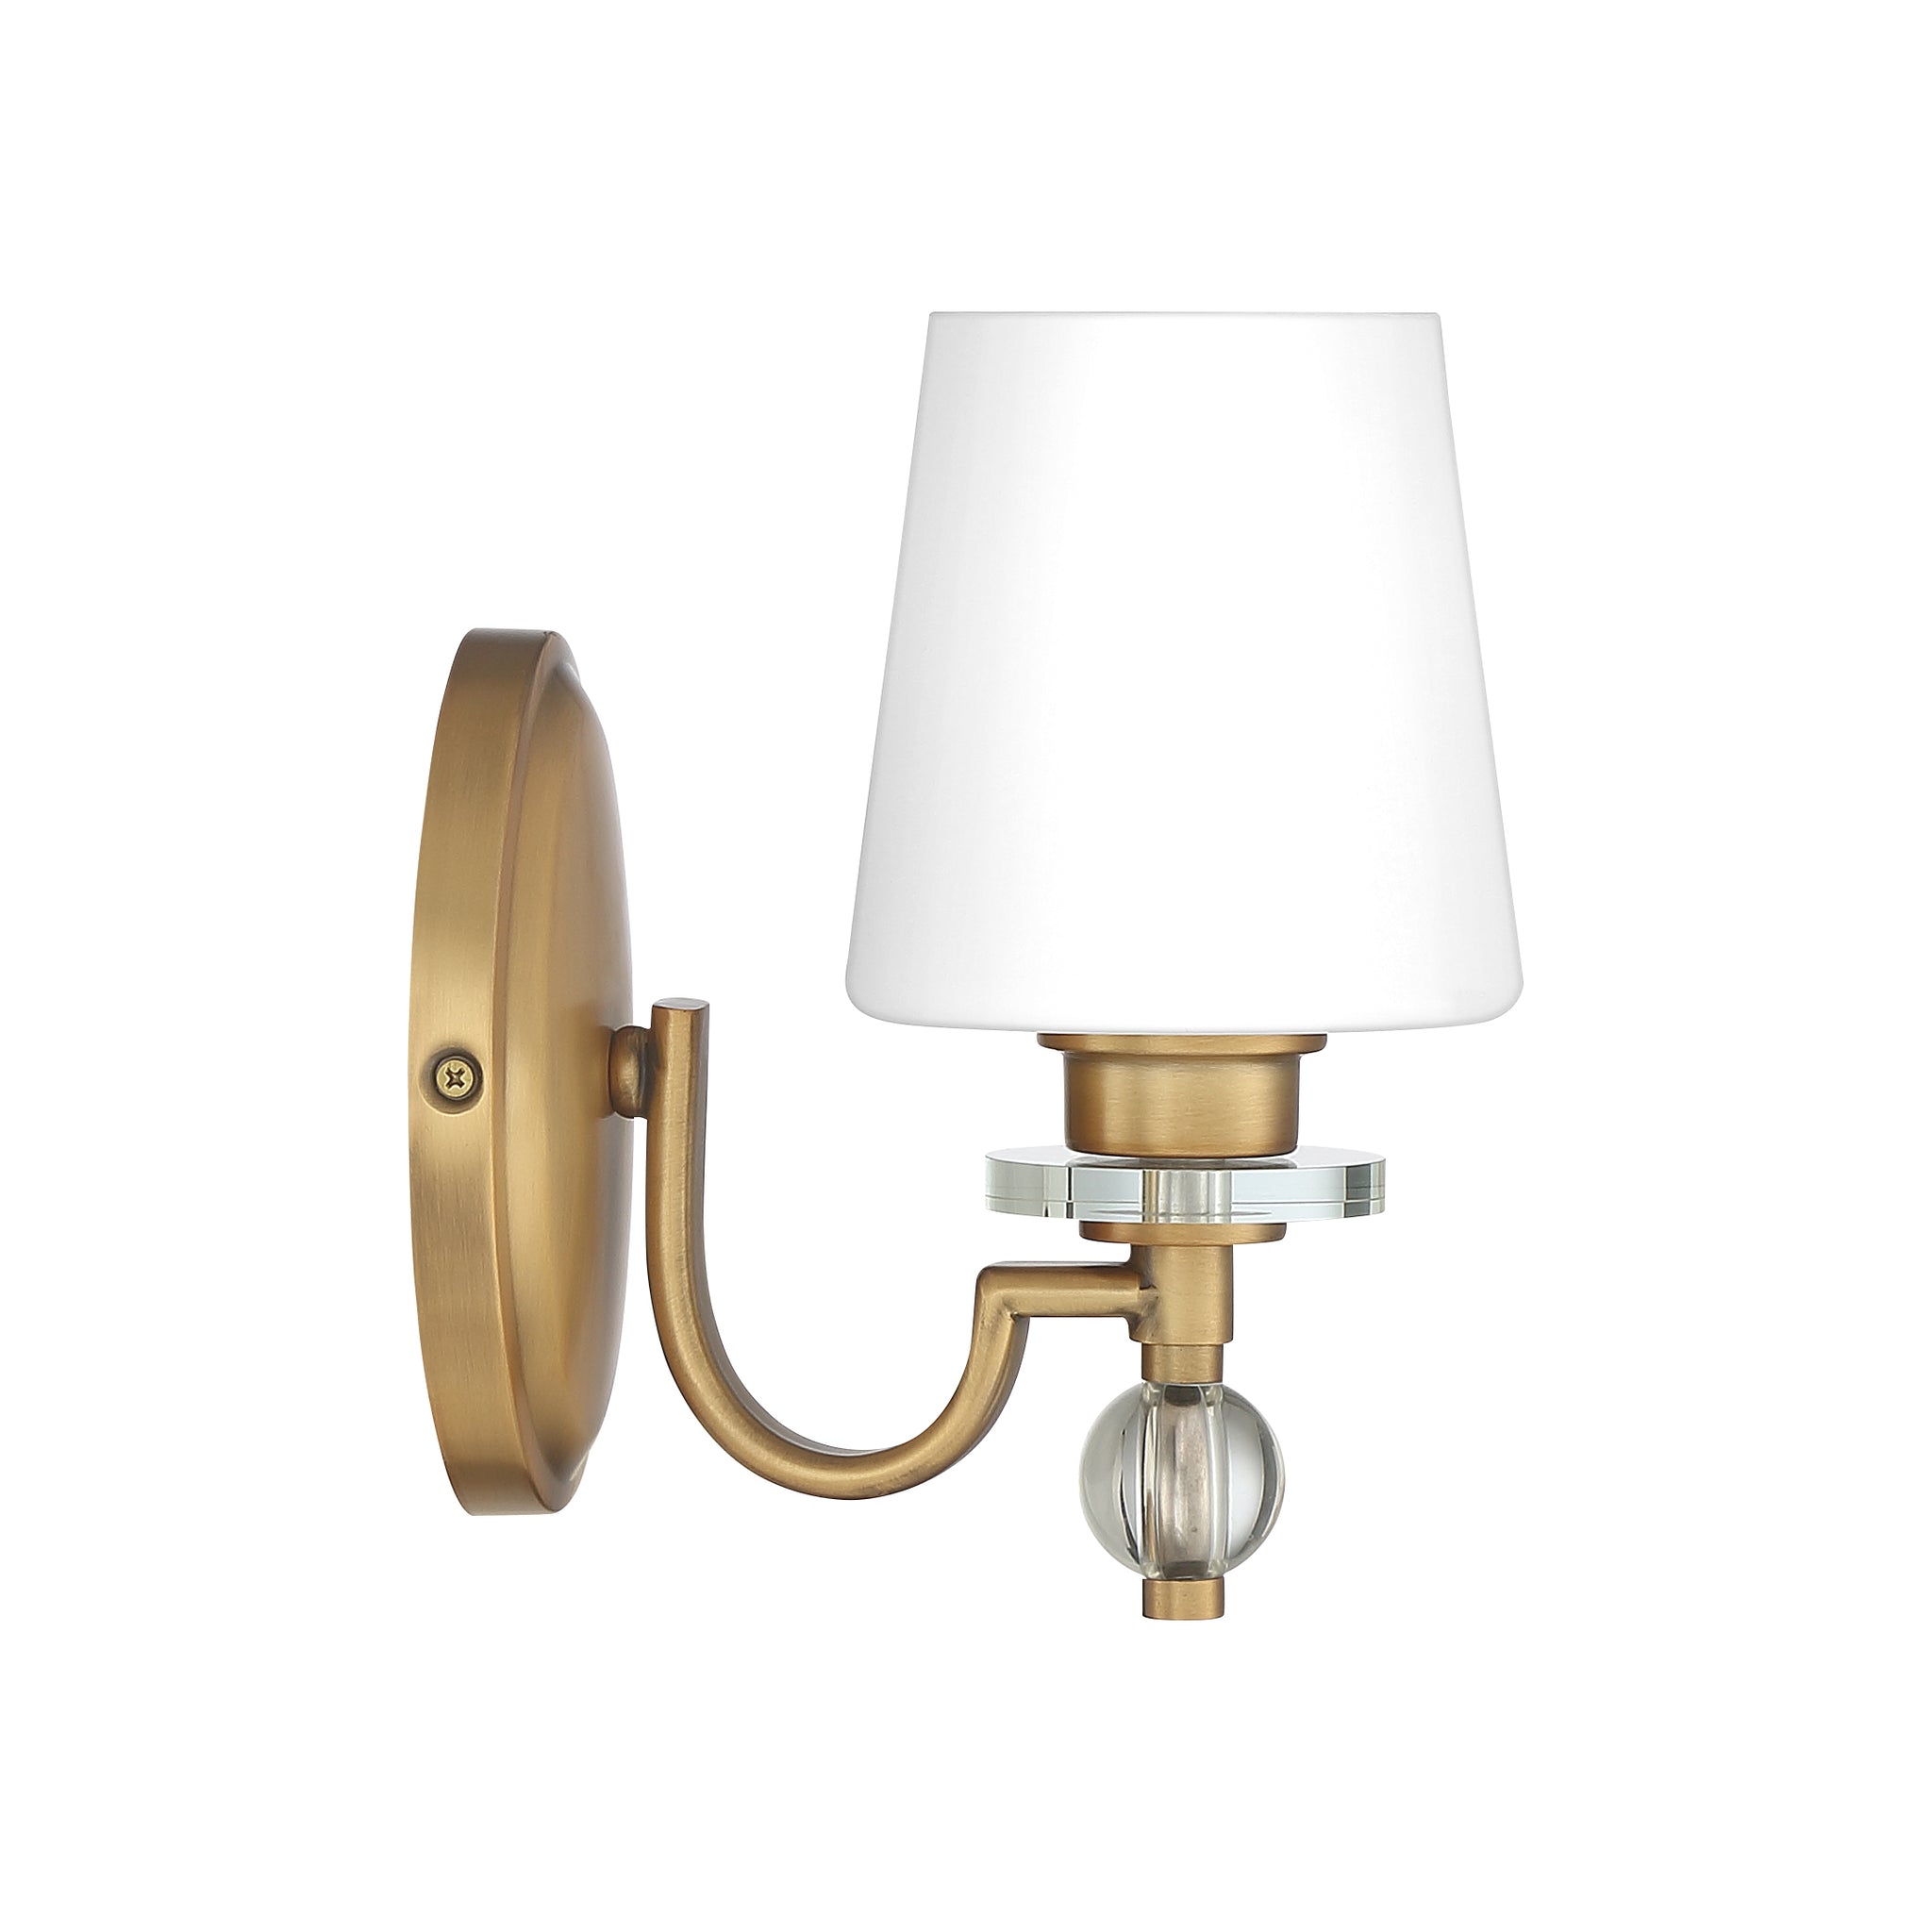 Hollister Sconce Weathered Brass